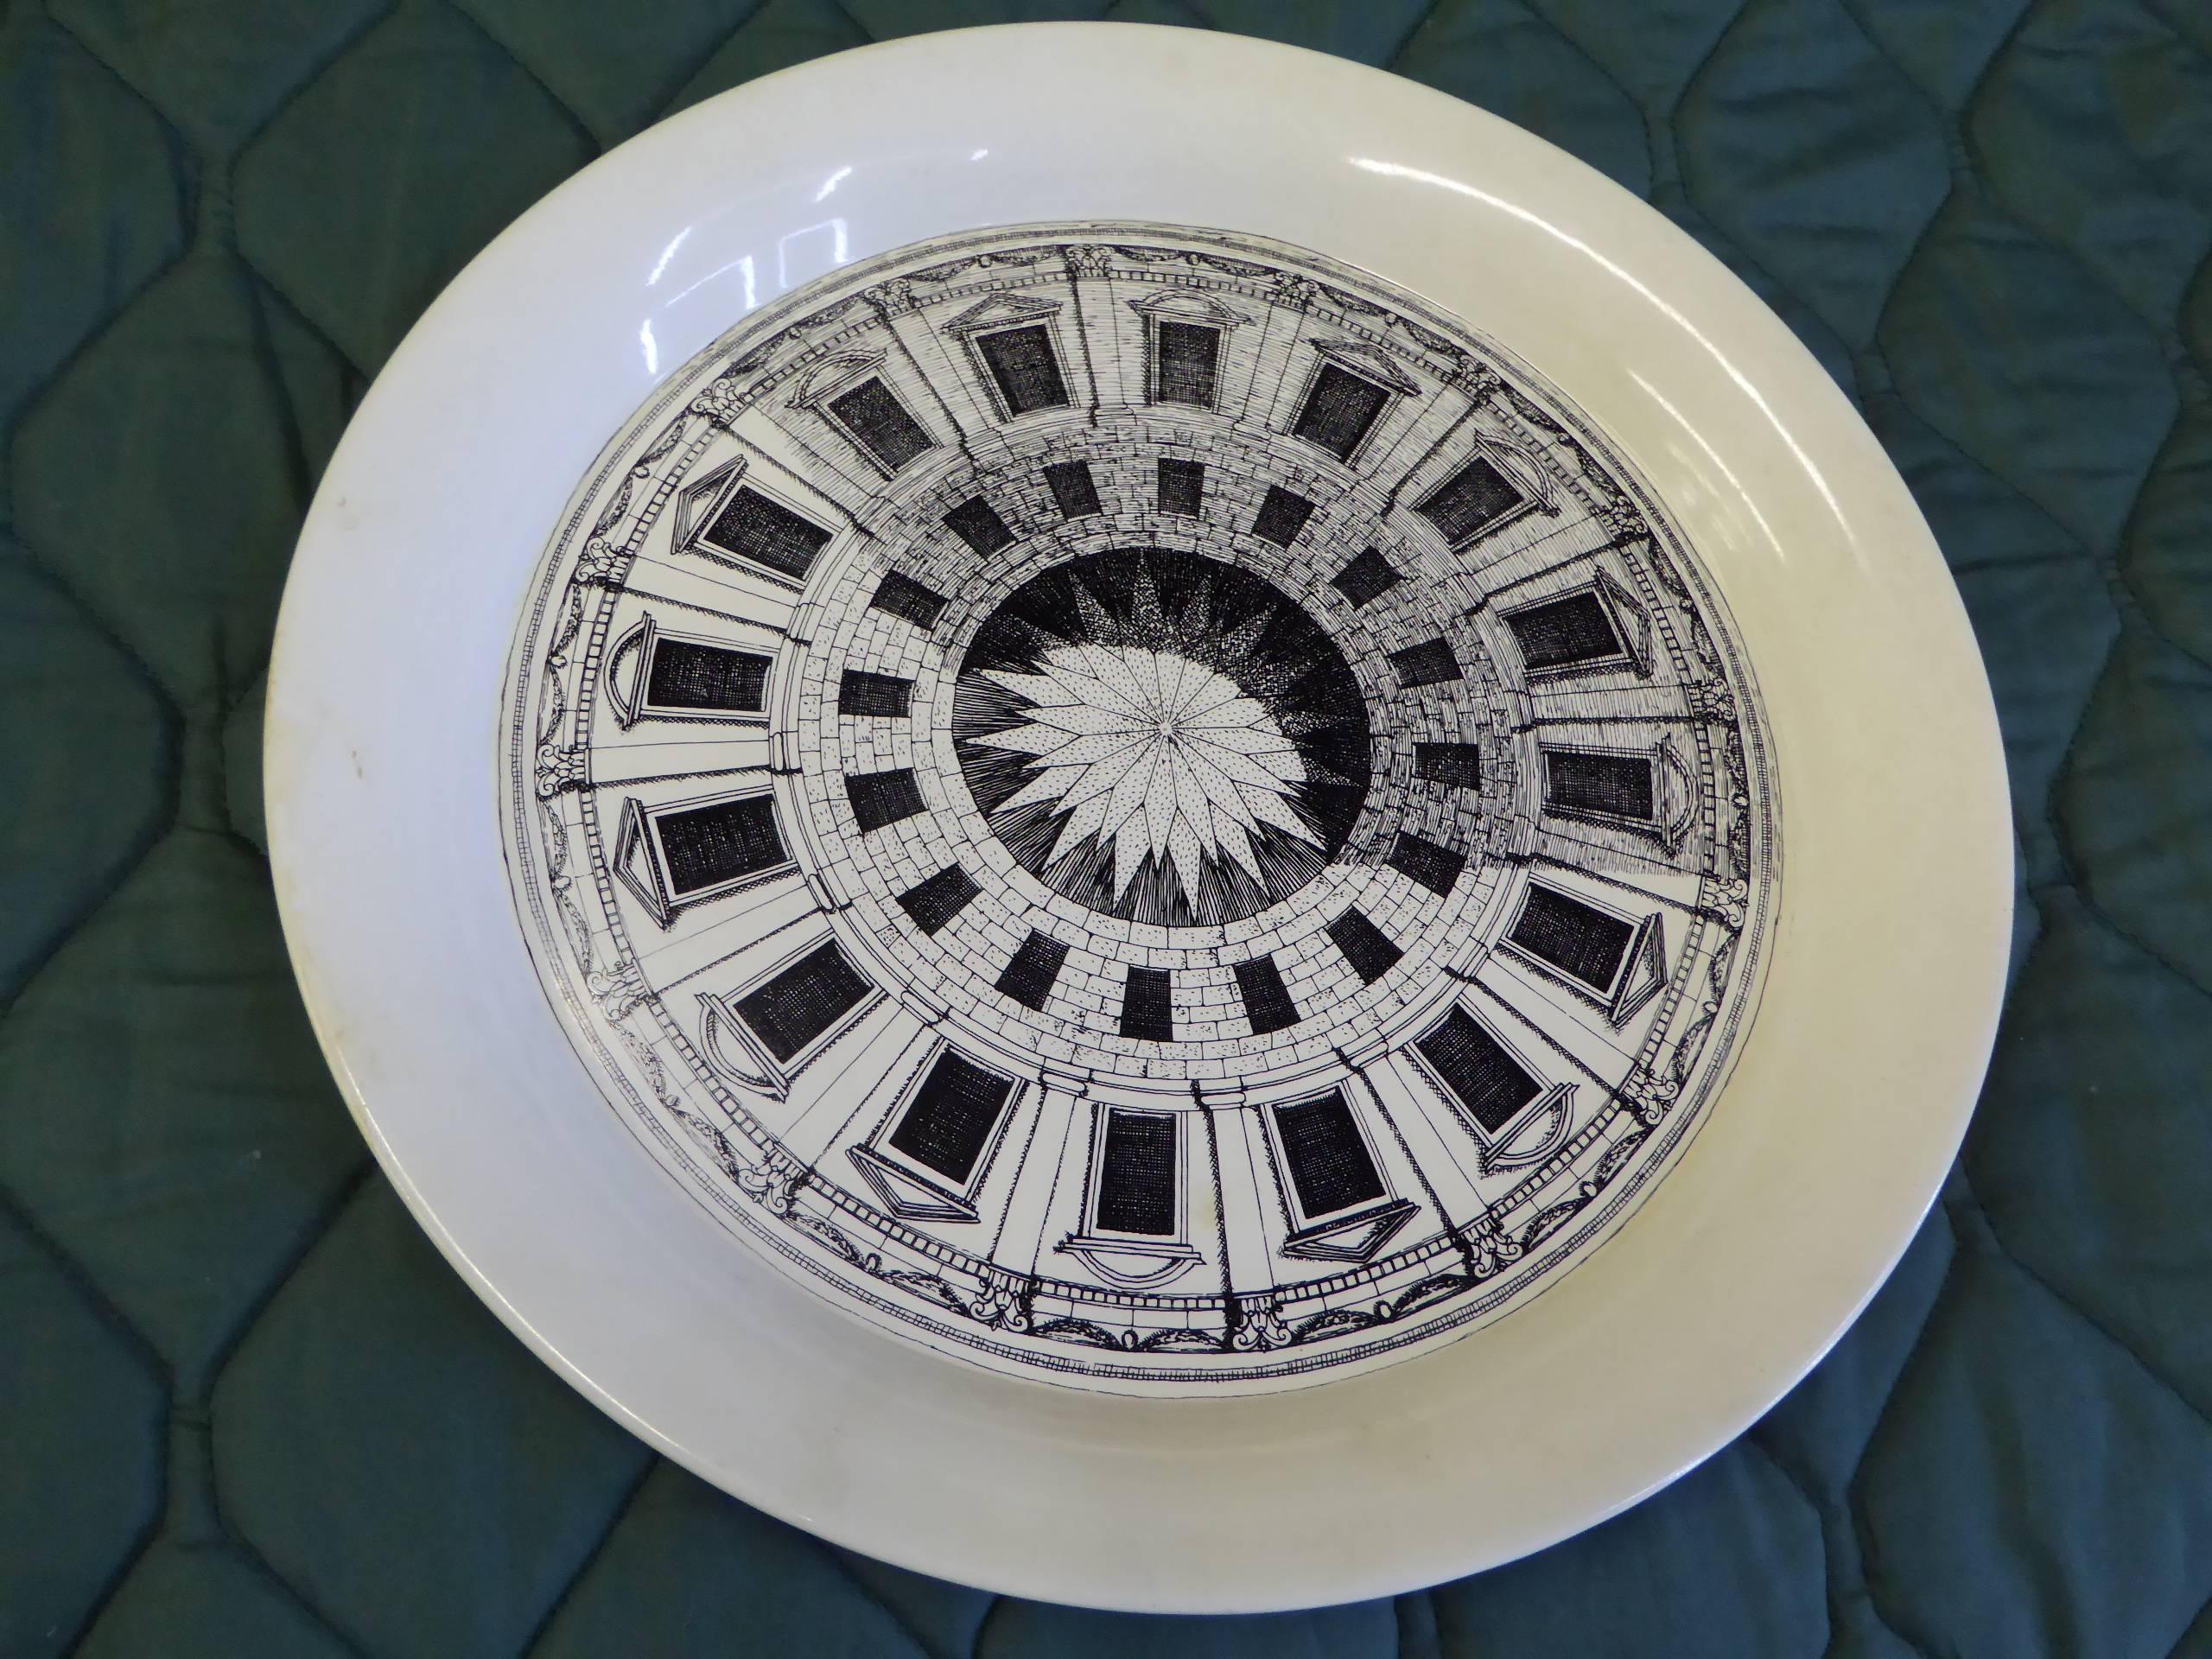 Piero Fornasetti created the Cortile designs in 1954. Showing polygonal courtyards, seen from above, they differed from the dome designs which are seen from below. This metal tray from his studio features a rolled edge in antique cream enamel with